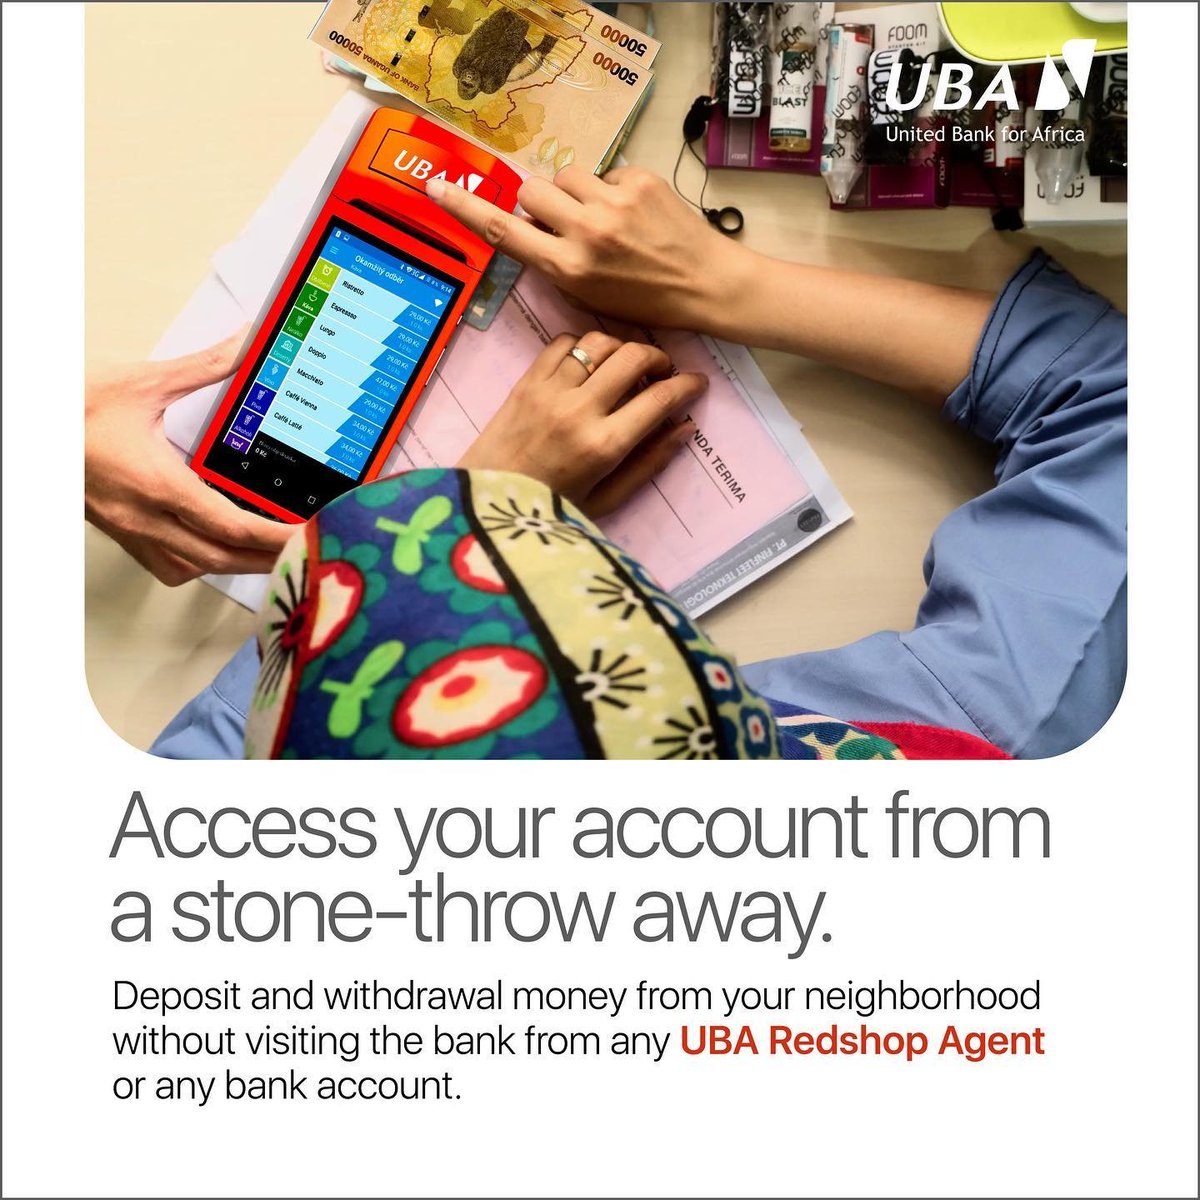 The bank that expands horizons, even to your neighborhood. Visit a UBA Agent today and transact conveniently. Click ubauganda.com/agency-banking/ to view a list of our Agents countrywide or call 0800100030/0780142329 or send an email to cfcuganda@ubagroup.com for more information.…